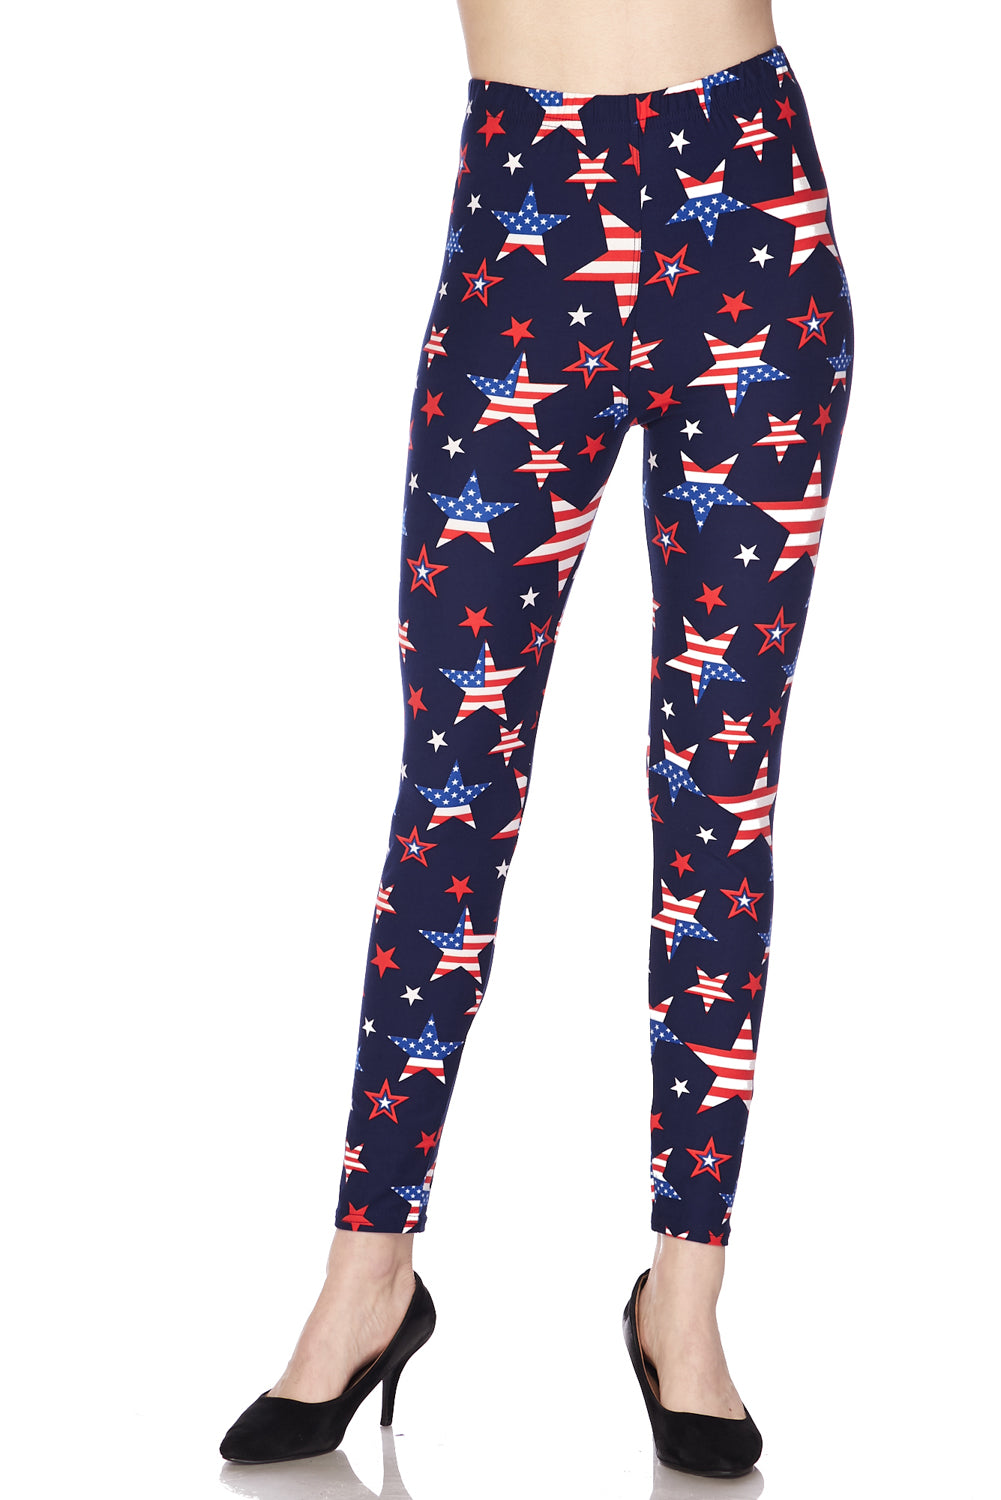 Freedom Stars-4th of July Plus Size Leggings – Polly's Premium